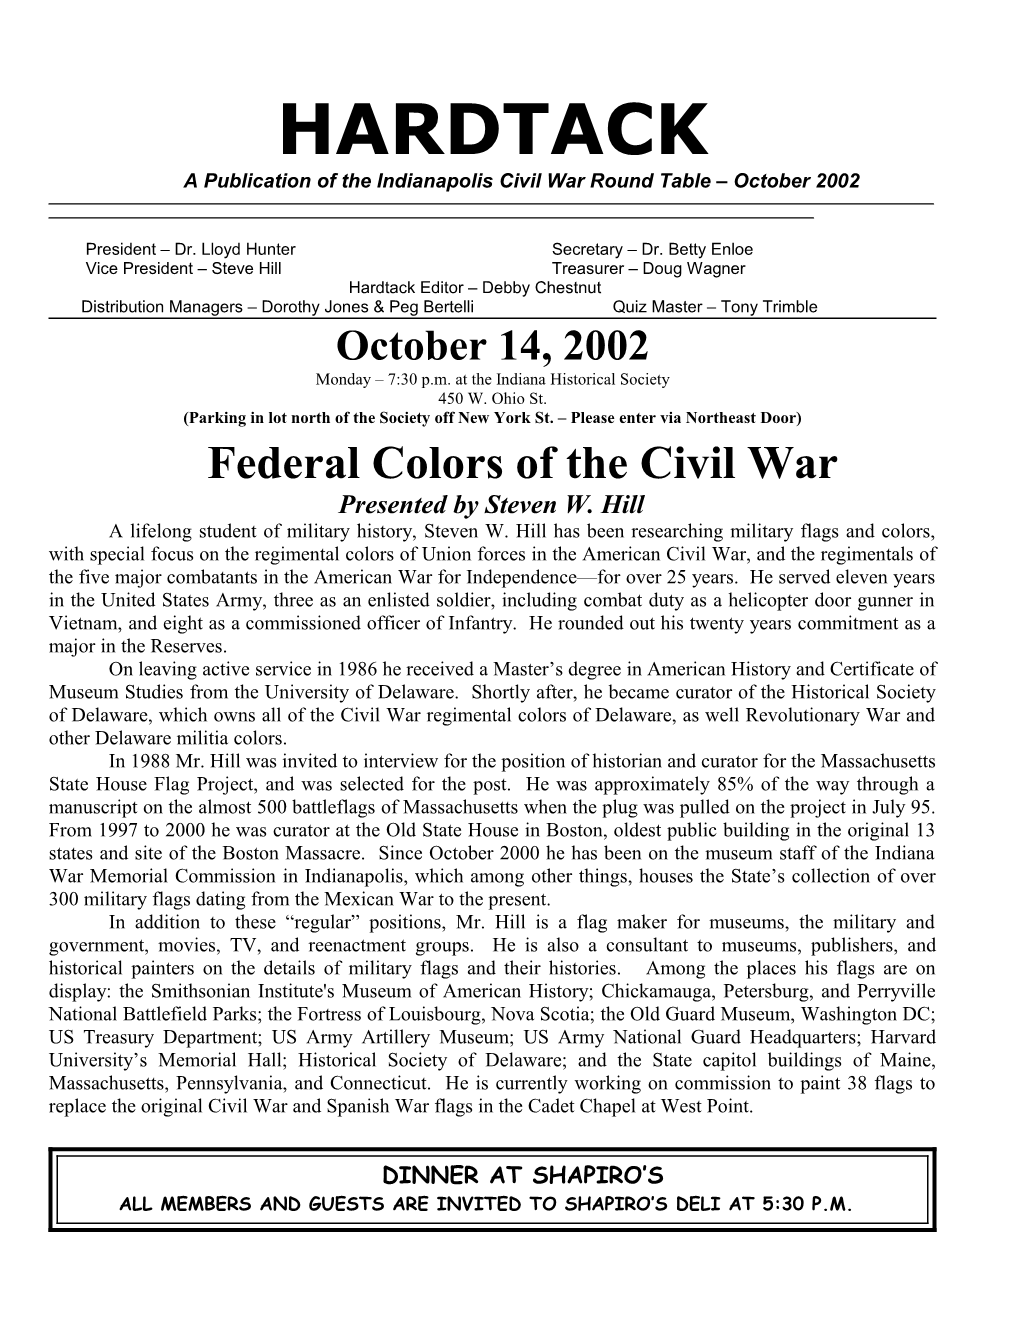 A Publication of the Indianapolis Civil War Round Table October 2002